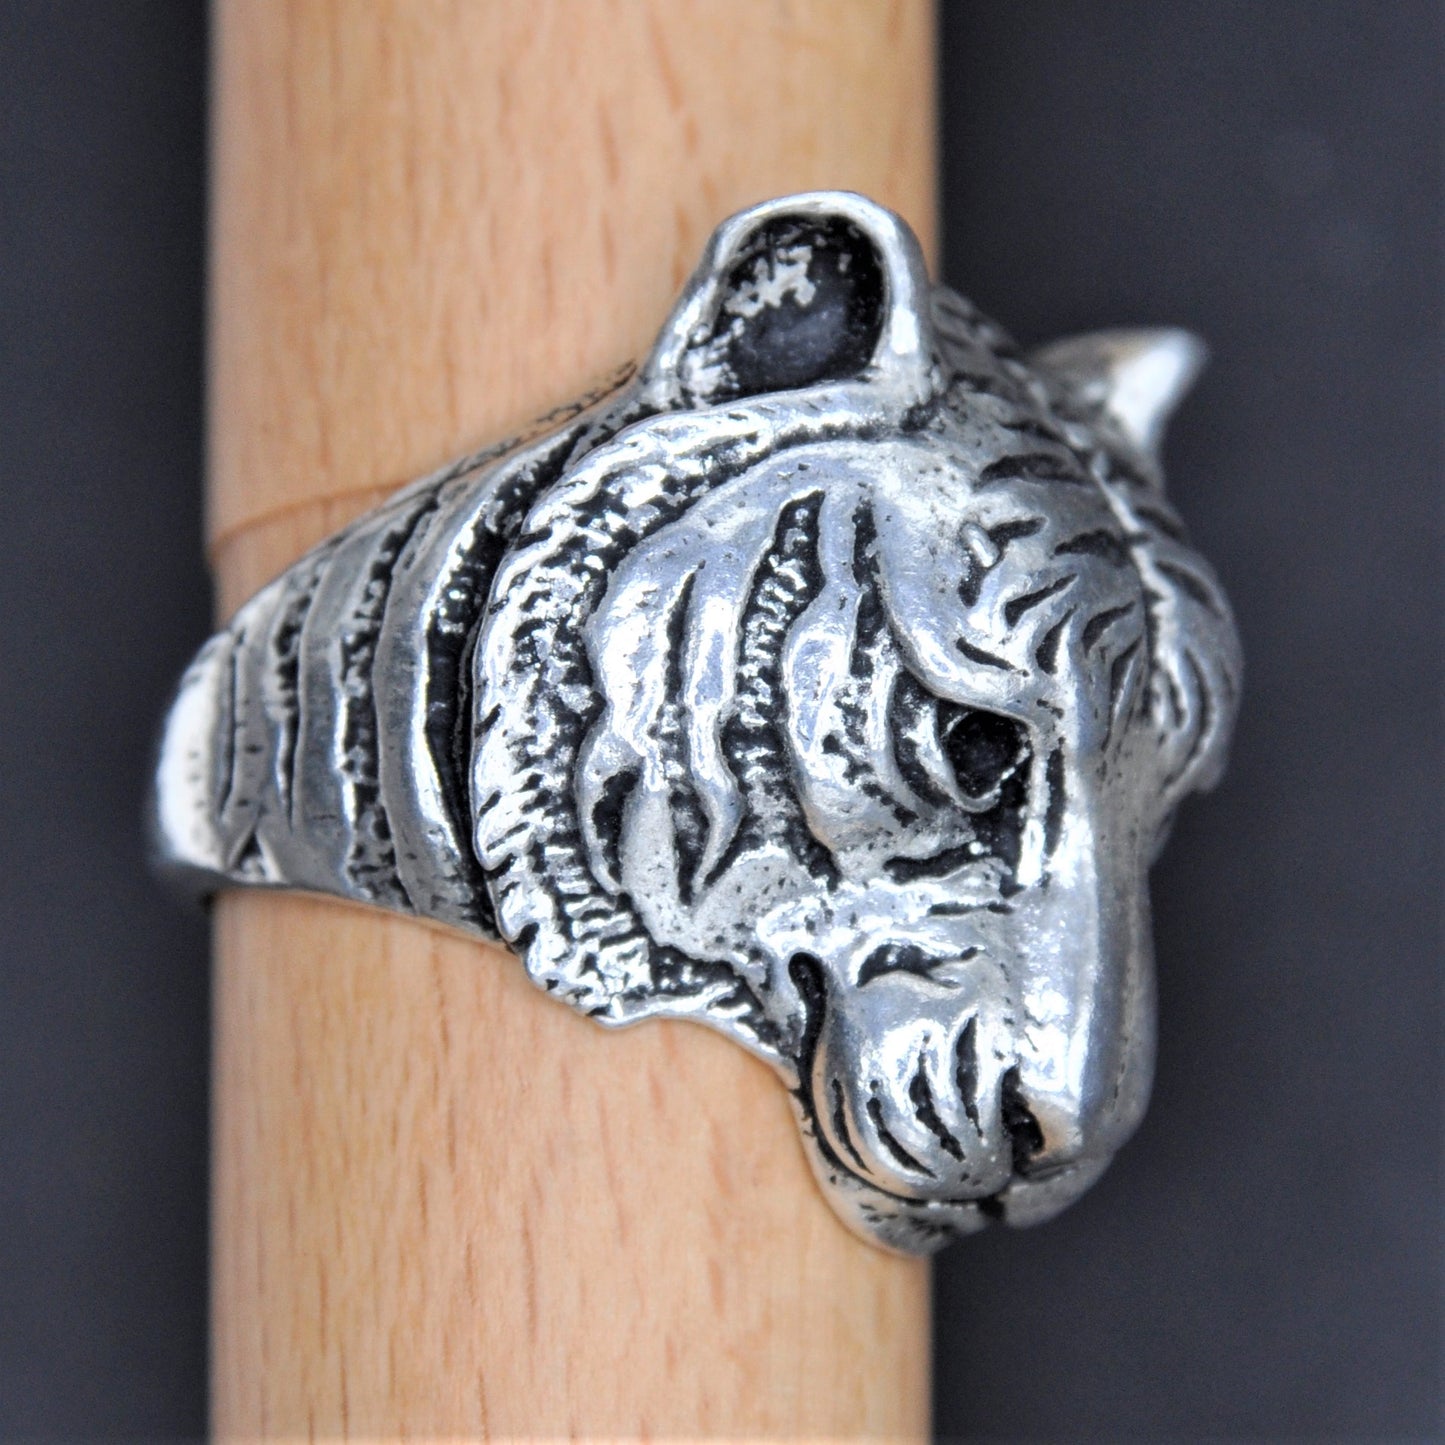 Tiger Ring in Sterling Silver Size 9 1/2 Endangered Species Handcrafted Silver Jewelry